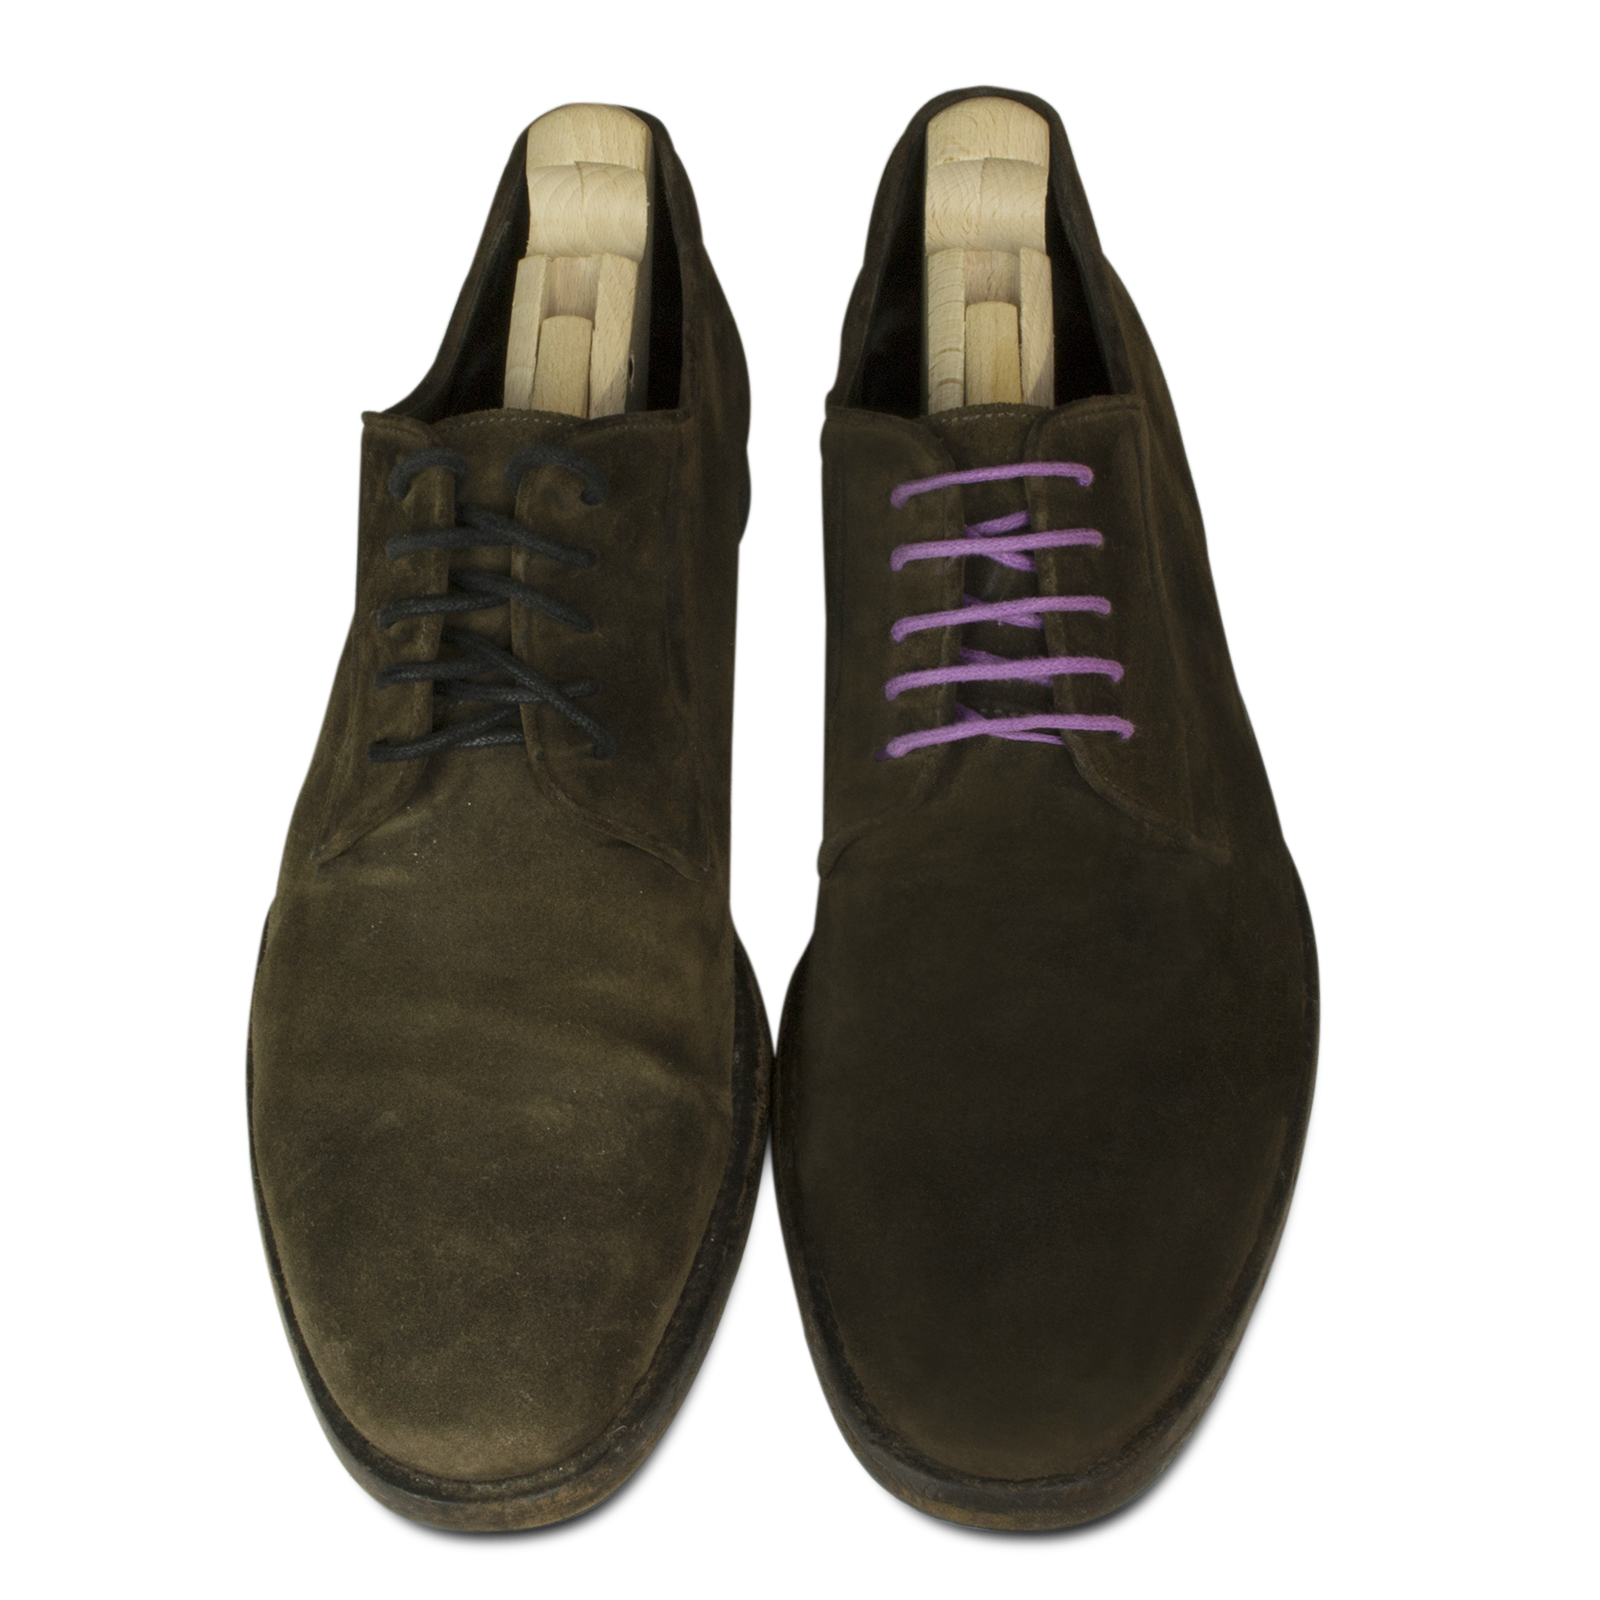 How to restore suede shoes using woly suede dye | Shoe String